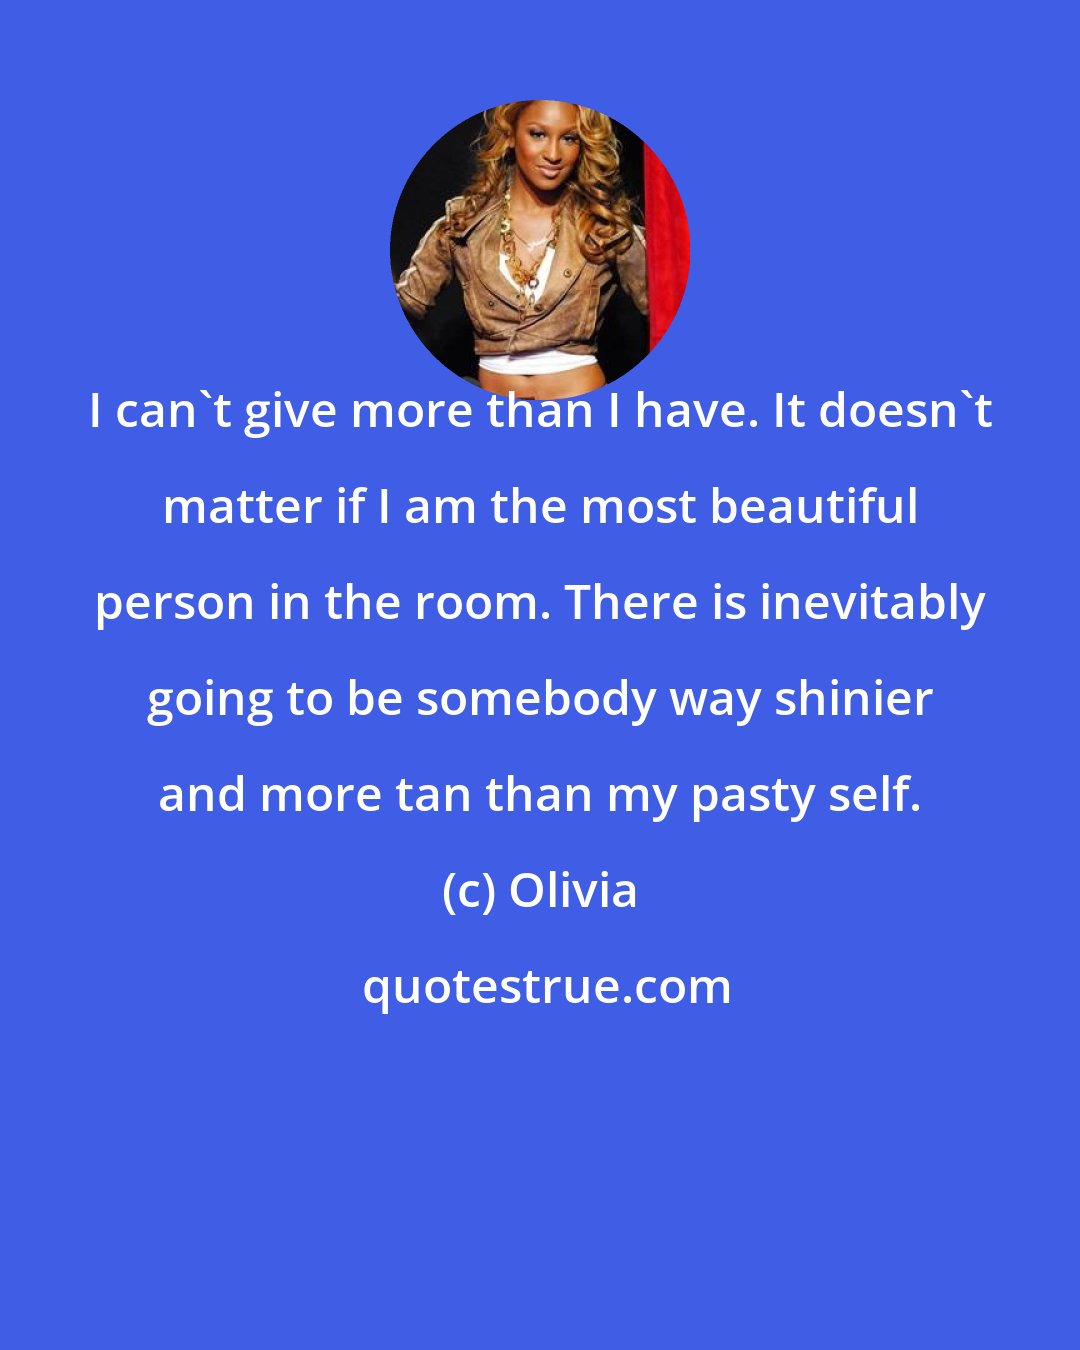 Olivia: I can't give more than I have. It doesn't matter if I am the most beautiful person in the room. There is inevitably going to be somebody way shinier and more tan than my pasty self.